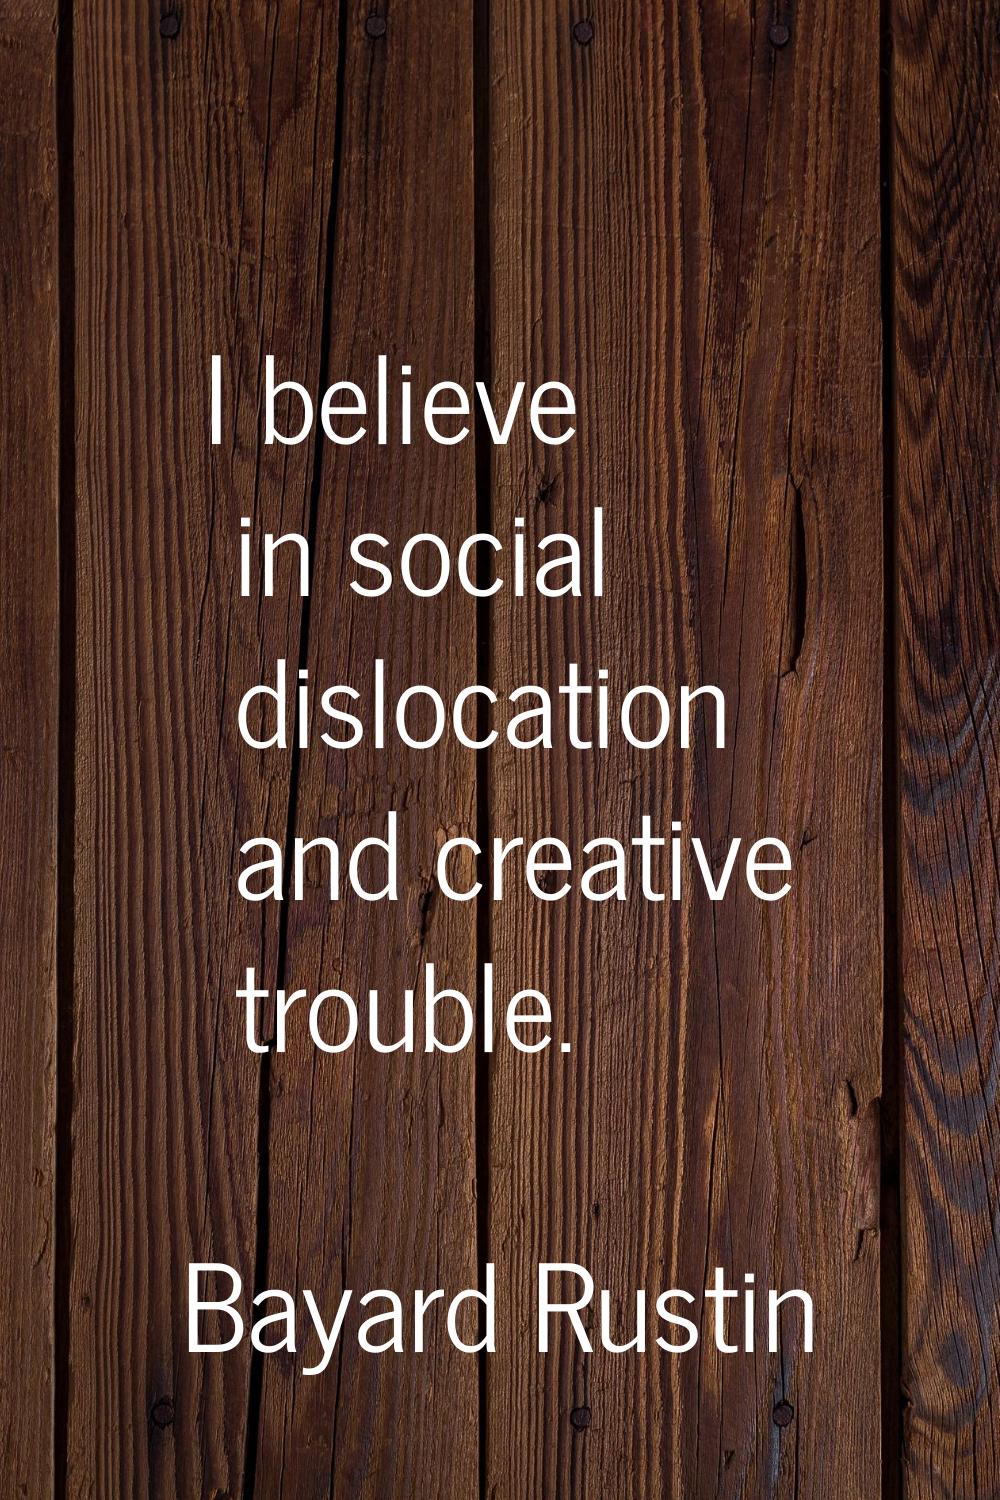 I believe in social dislocation and creative trouble.